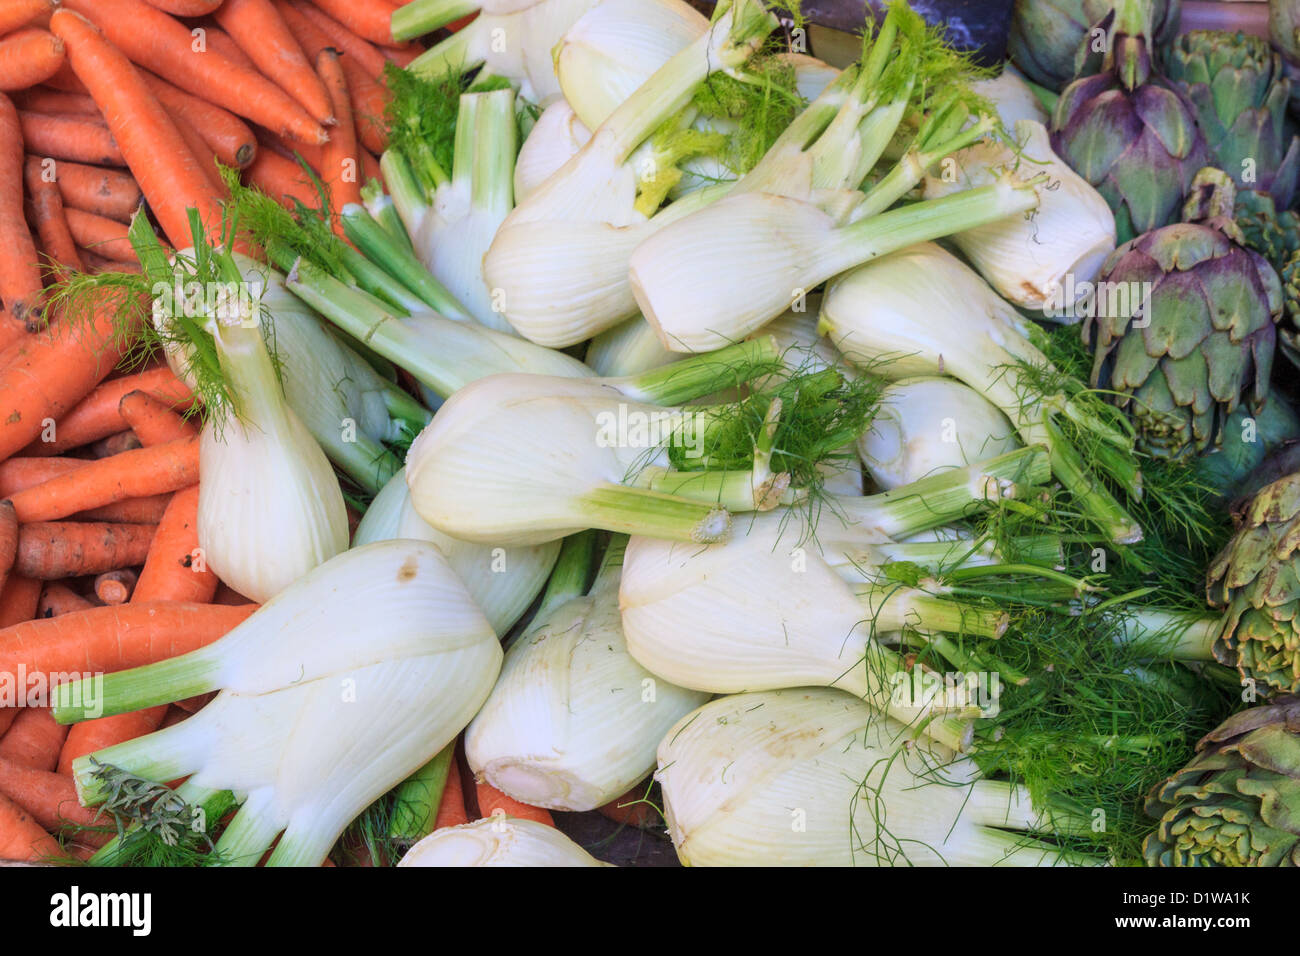 Fennel, carrots and artichoke at local market (close up view) Stock Photo